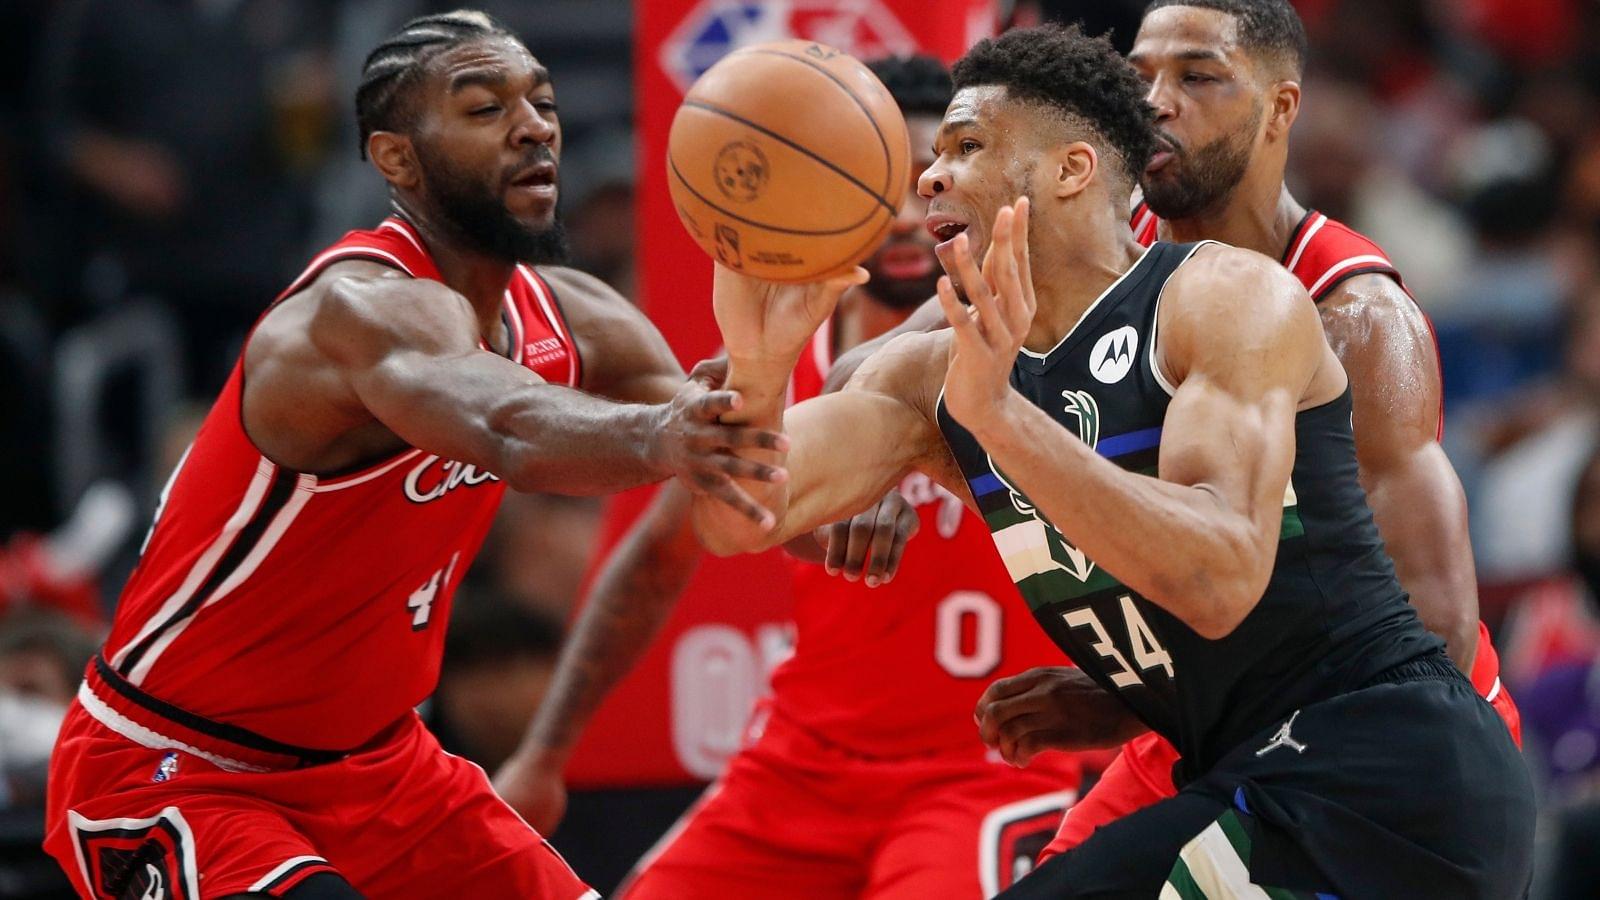 "Giannis Antetokounmpo is good, but he’s not God! He puts his pants on the same way I do": Patrick Williams is not scared of the Greek Freak, comes up with a bold statement as Bulls draw series